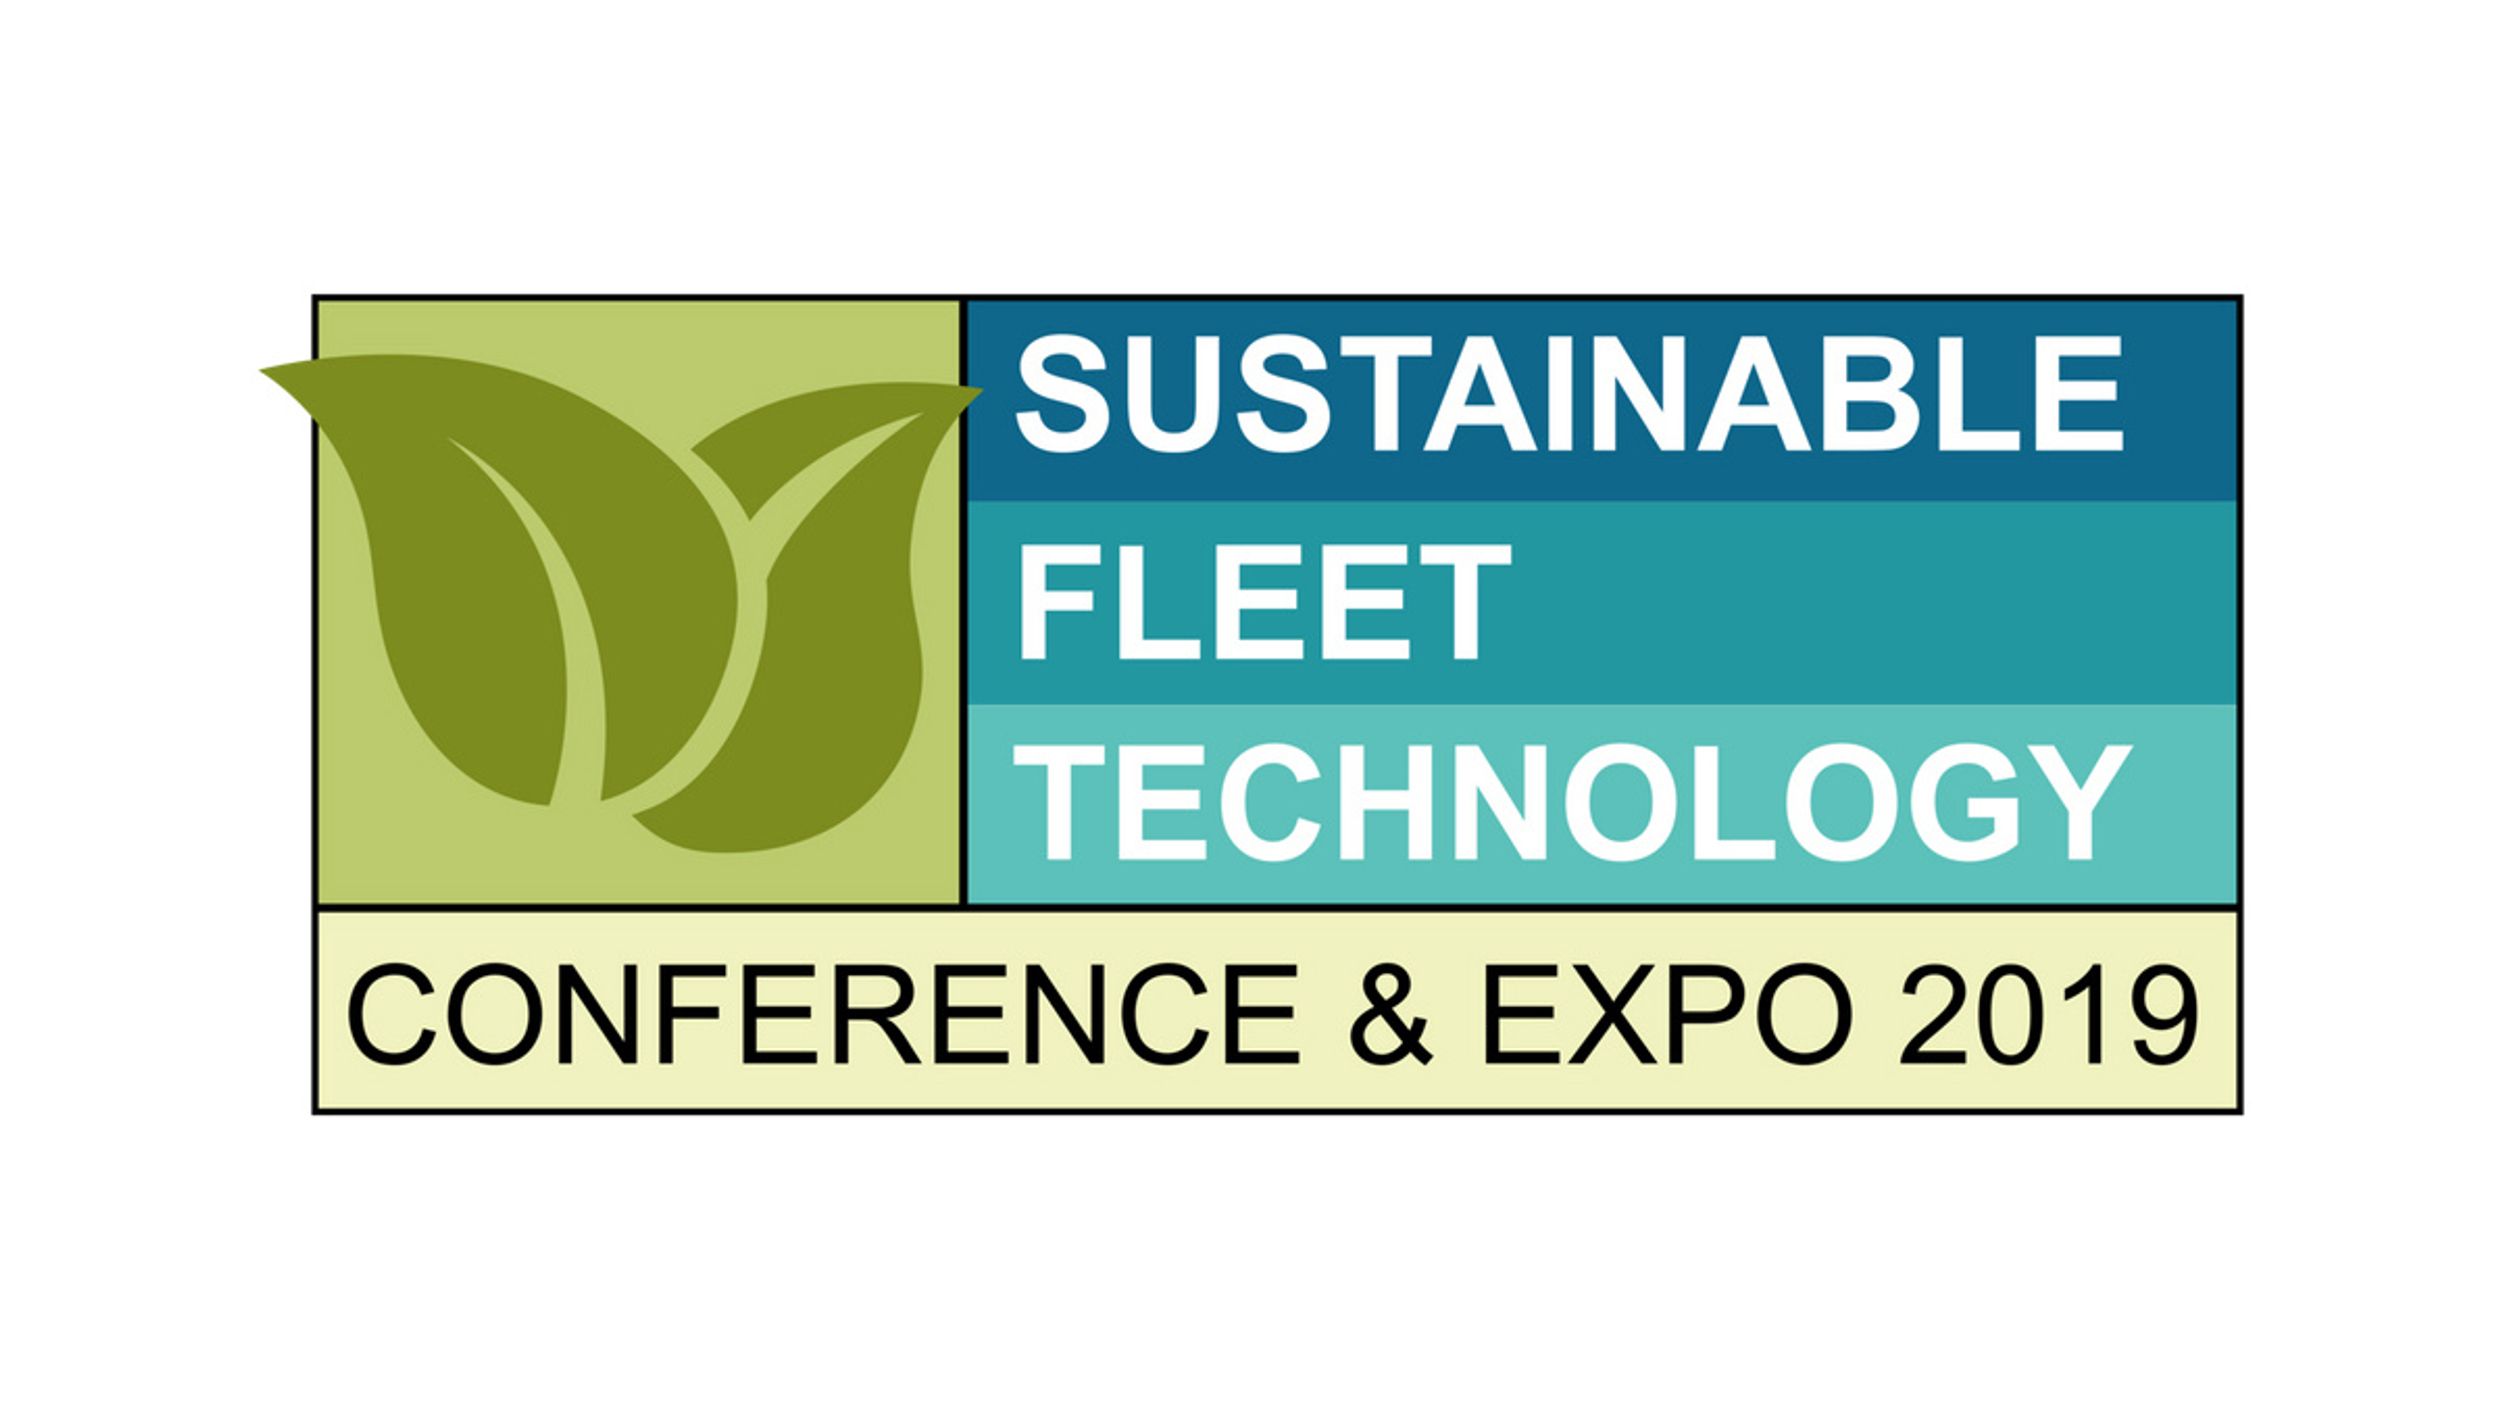 Penske to Participate in Sustainable Fleet Conference